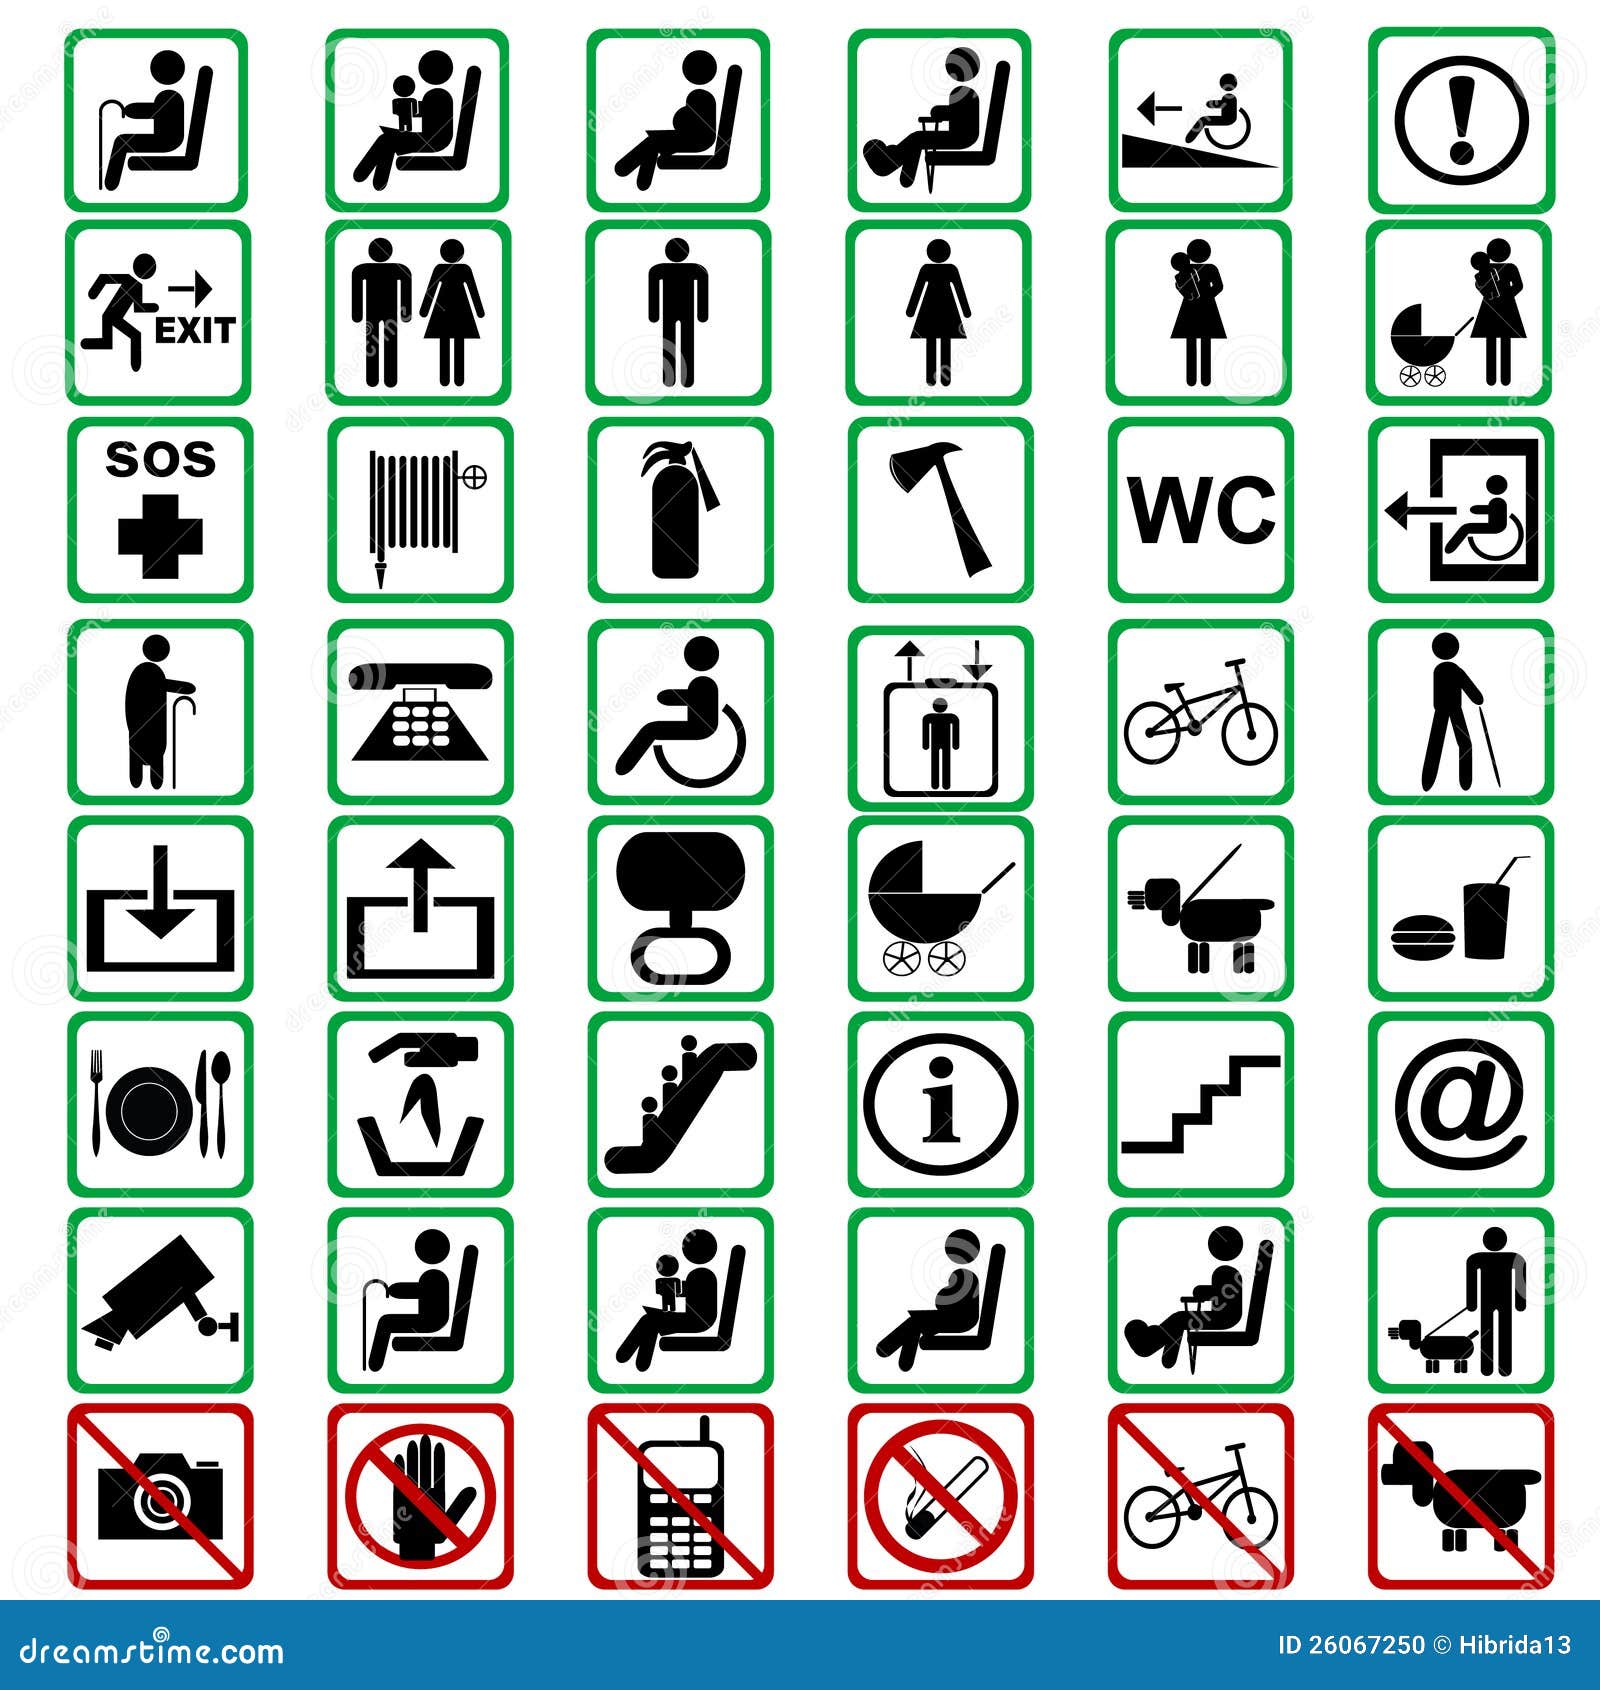 international signs used in tranportation means